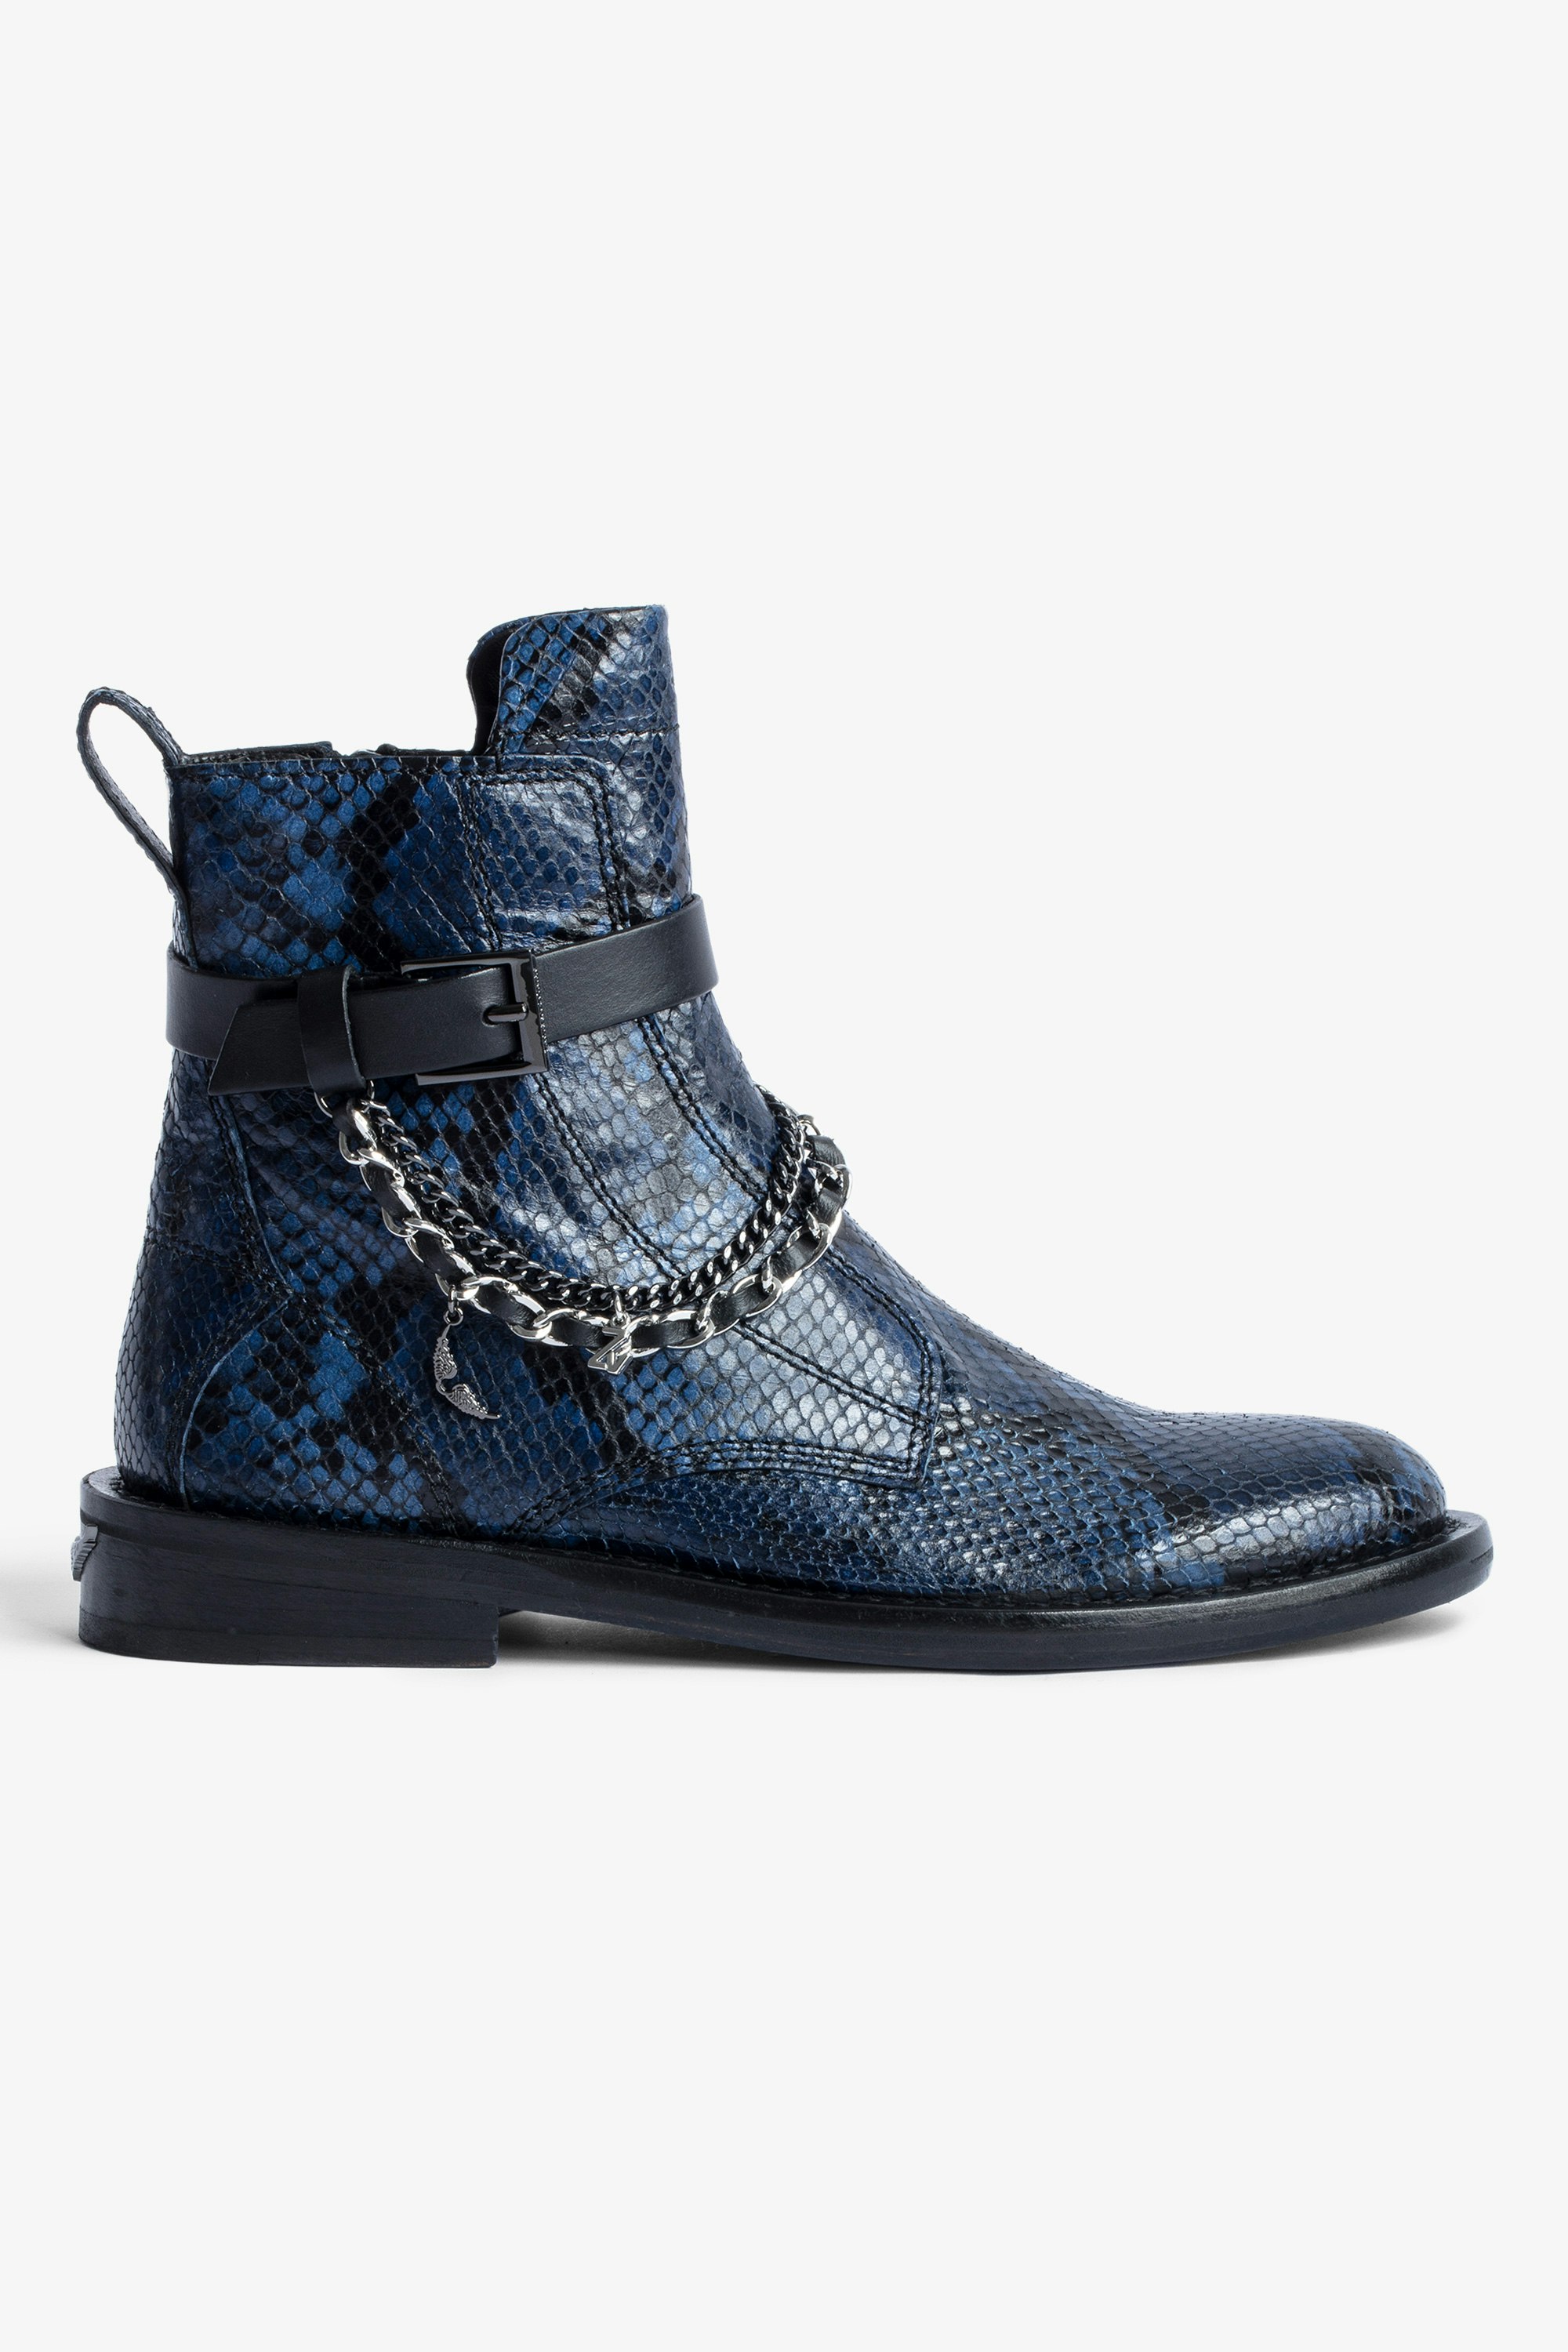 Laureen High Ankle Boots Women’s navy blue snake-embossed leather ankle boots with strap, double metal chain and charms